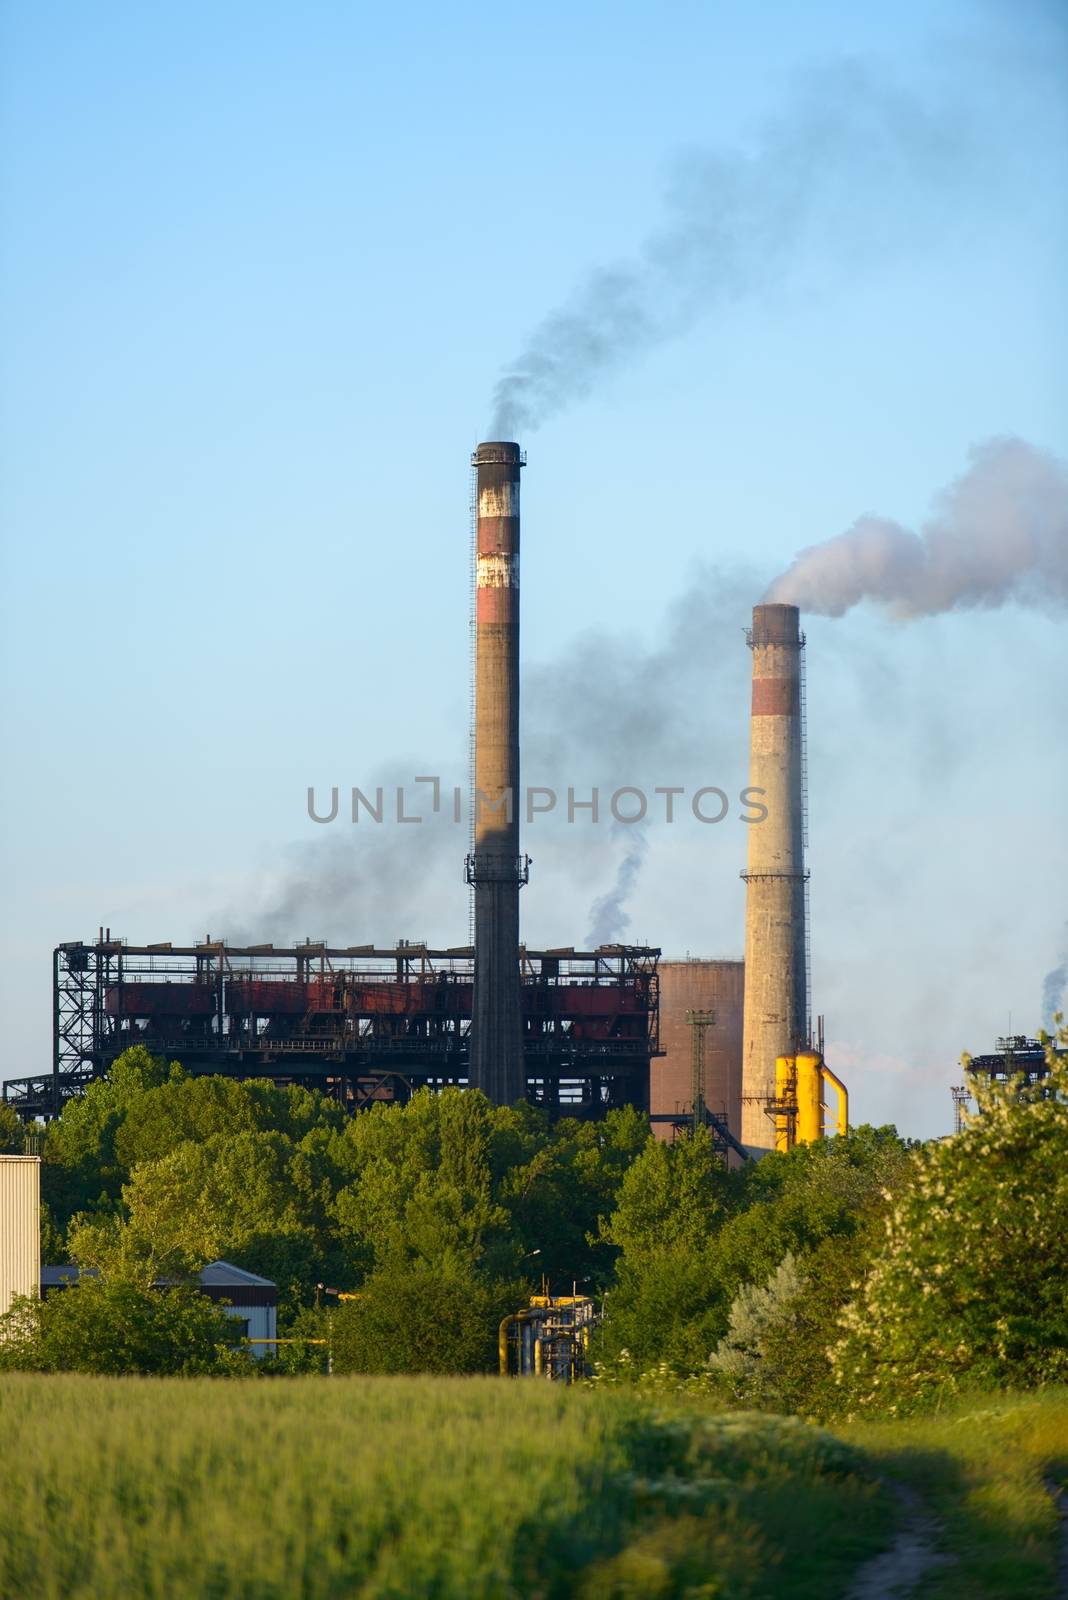 Chimney of a Power plant against blue sky